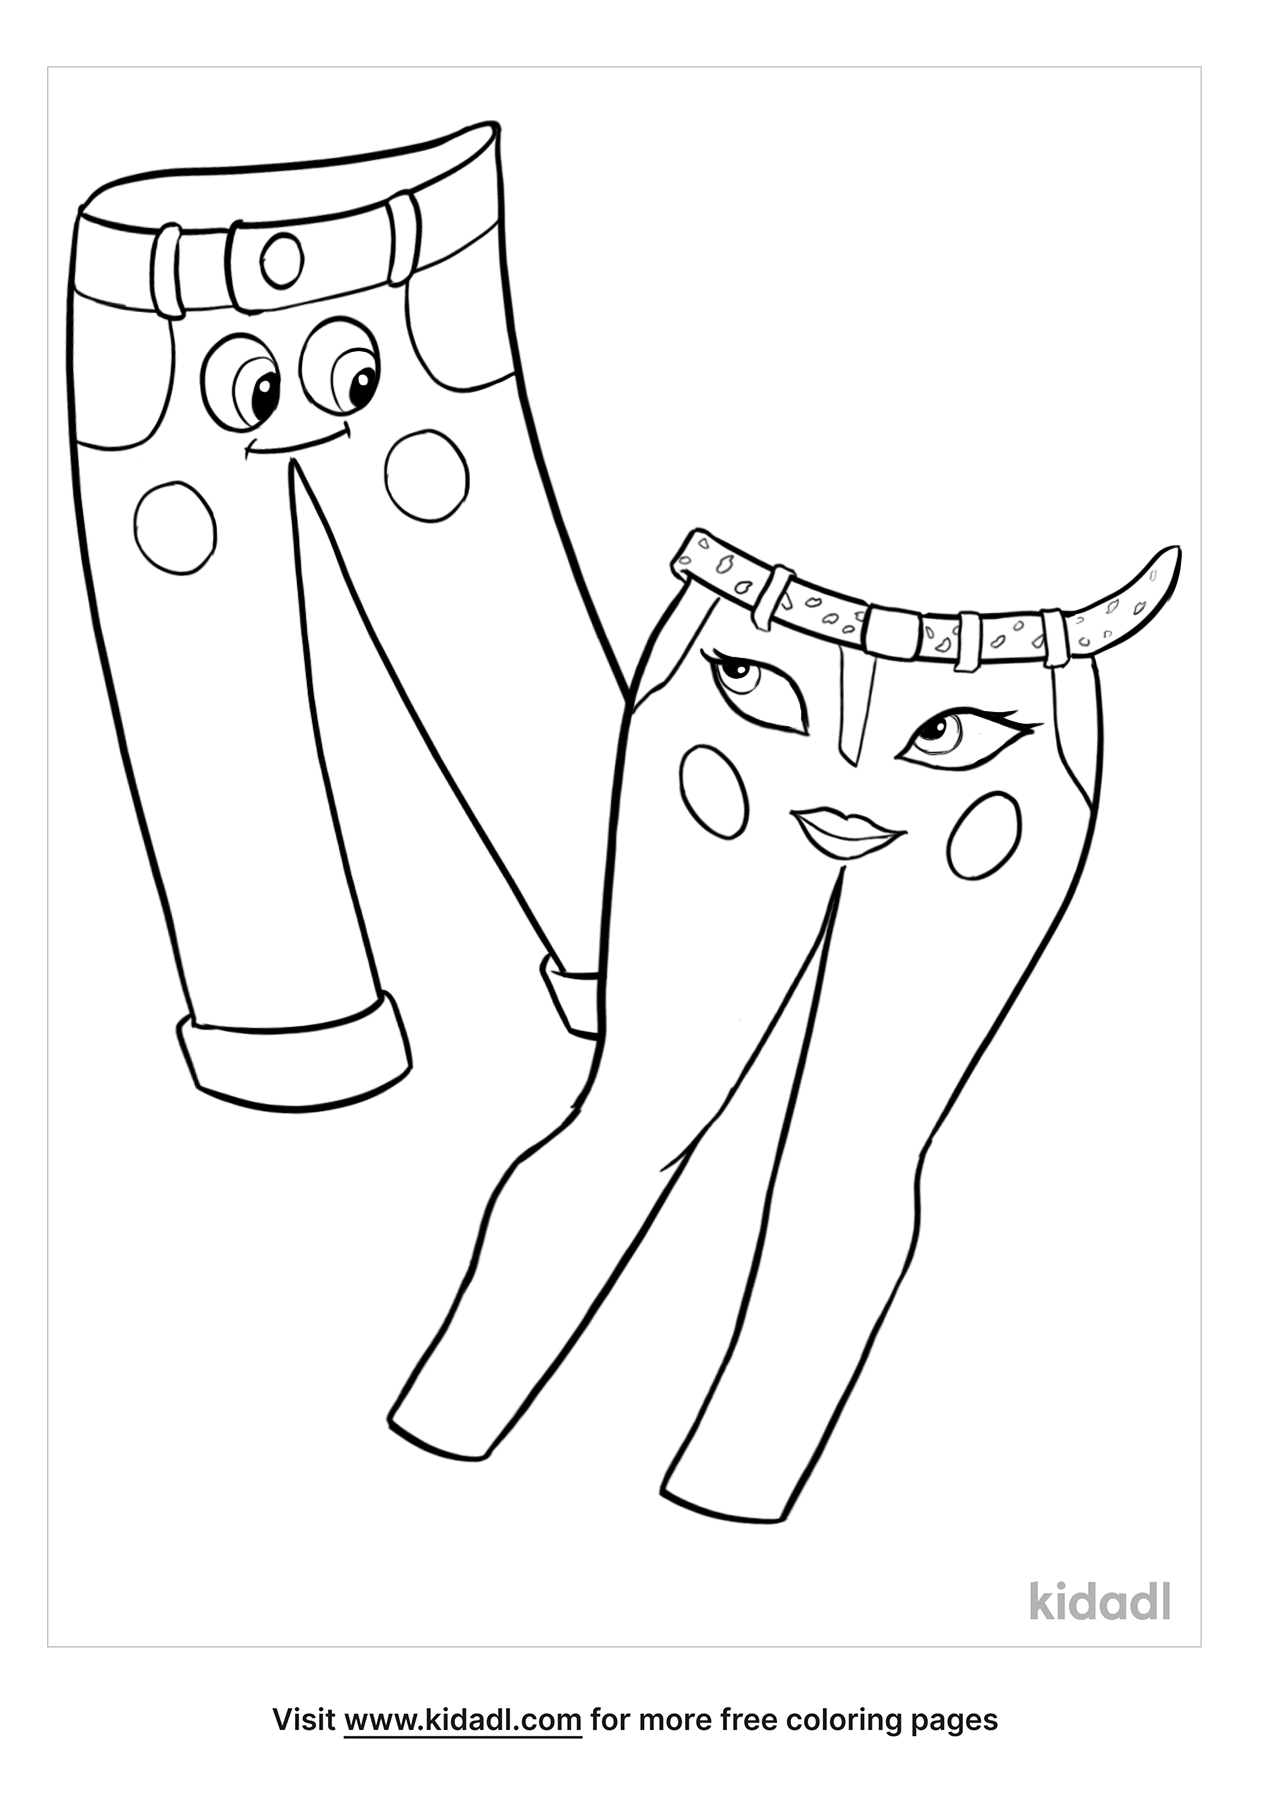 Pants Coloring Pages | Free Fashion-and-beauty Coloring Pages | Kidadl